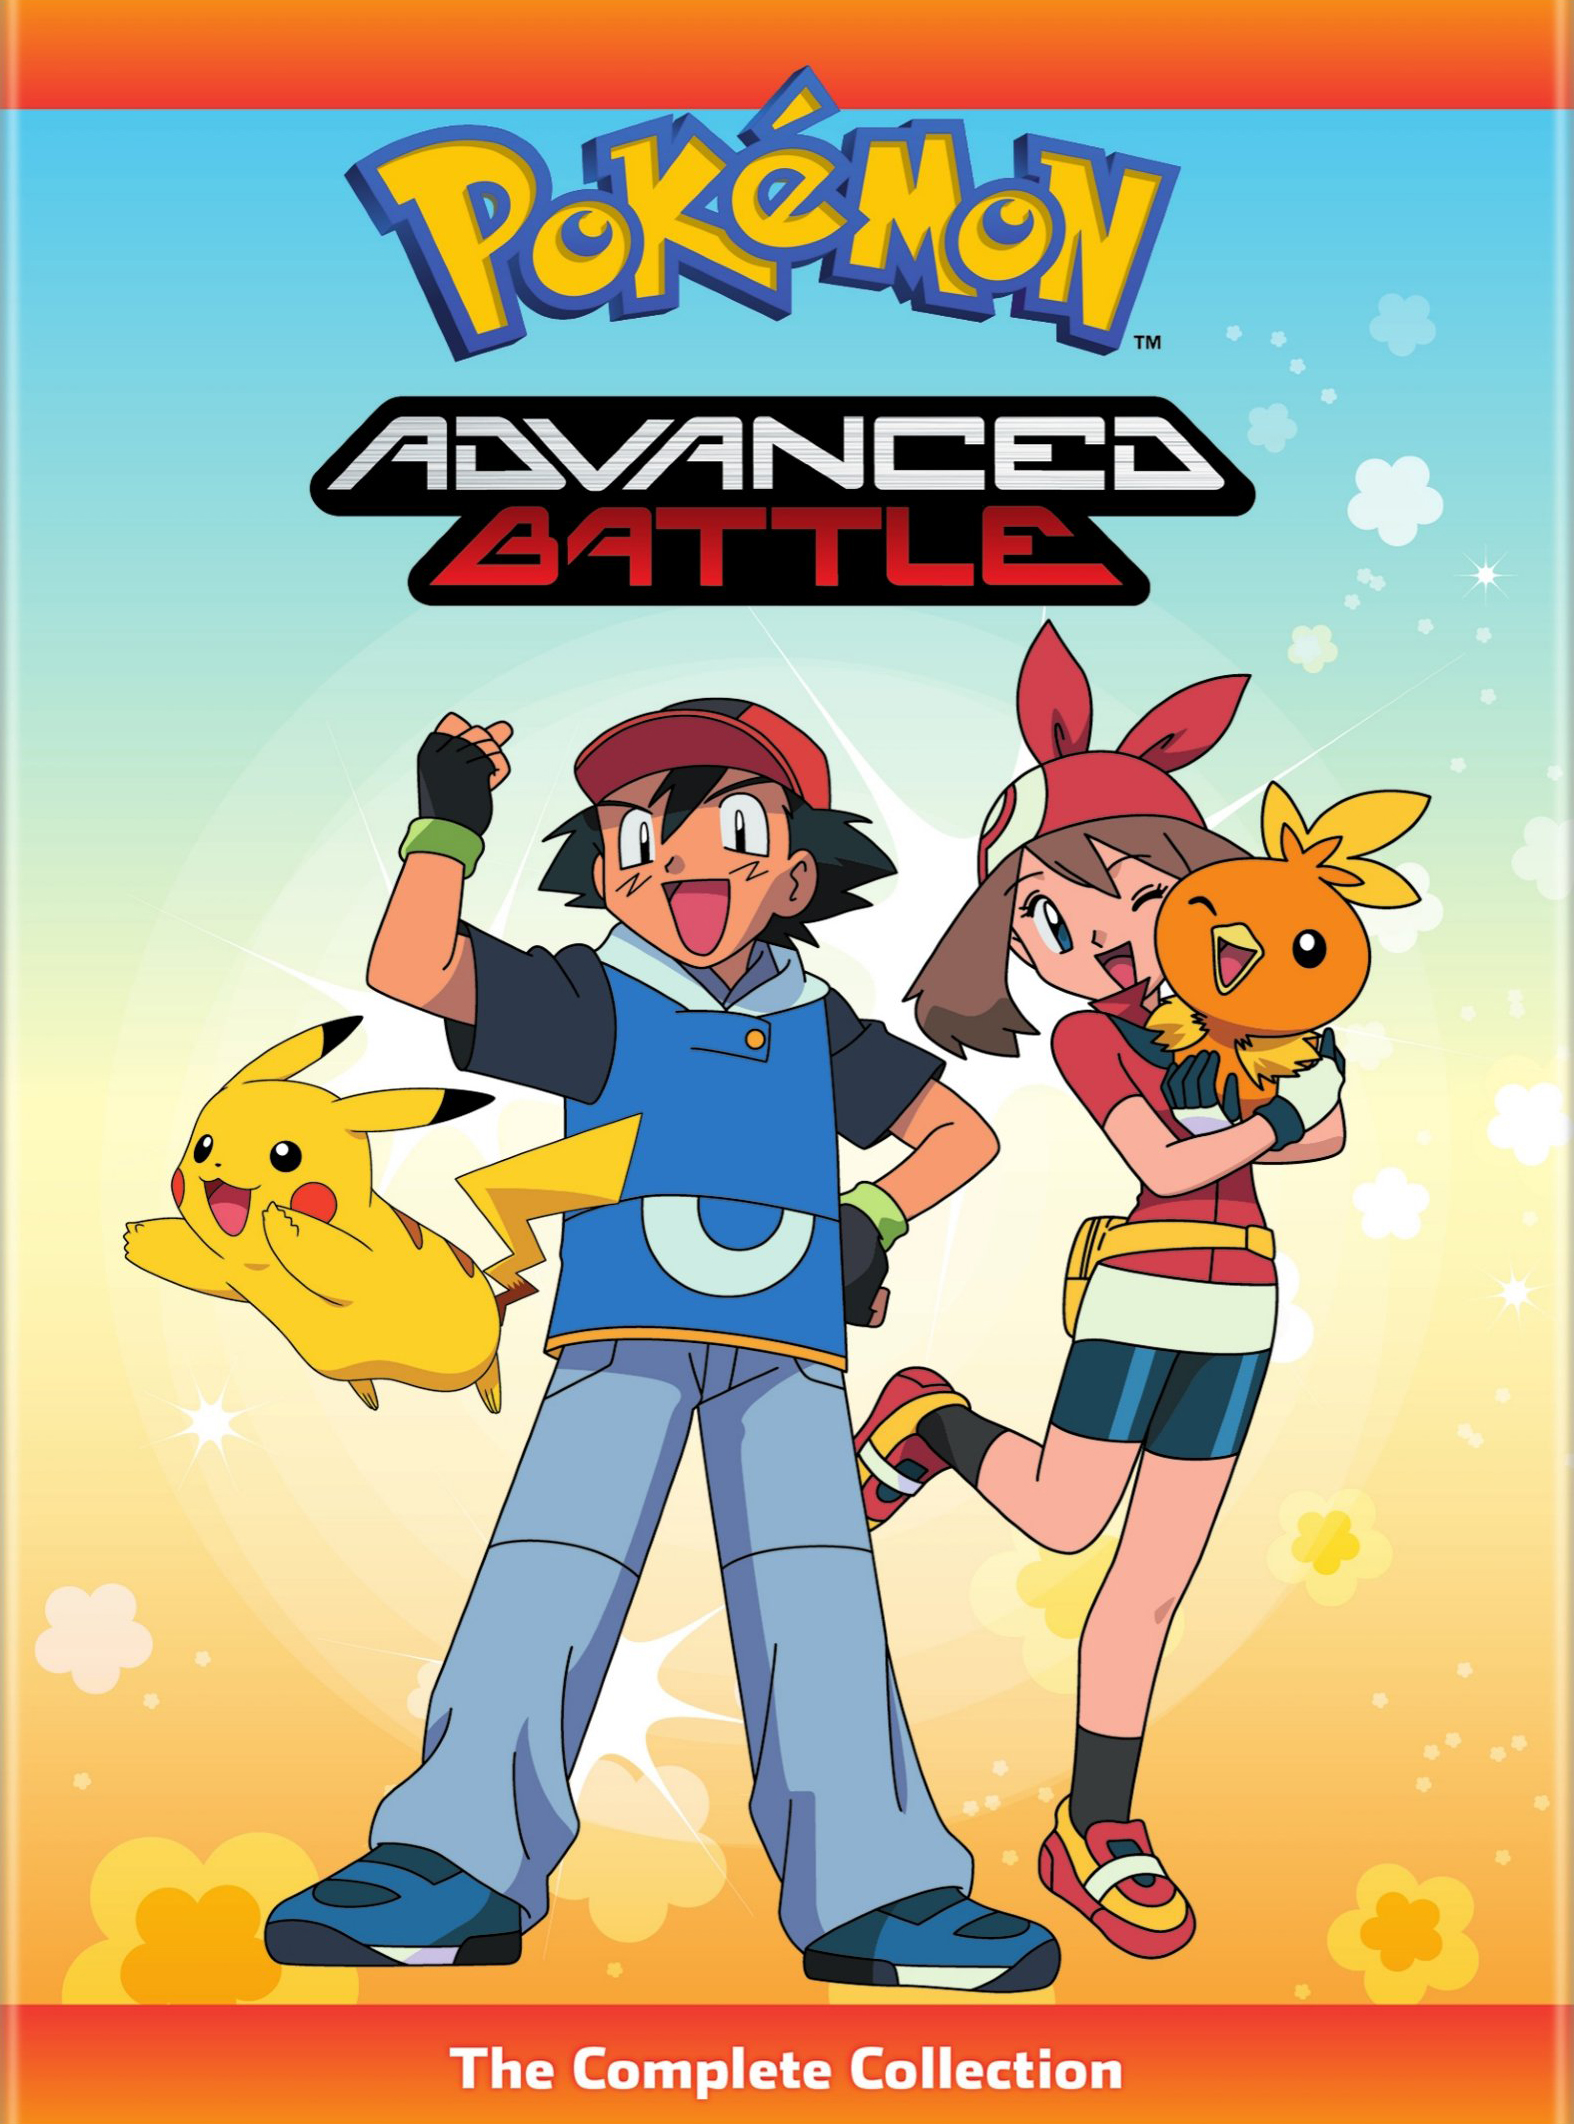 Pokemon the Movie: Genesect and the Legend Awakened [2013] - Best Buy